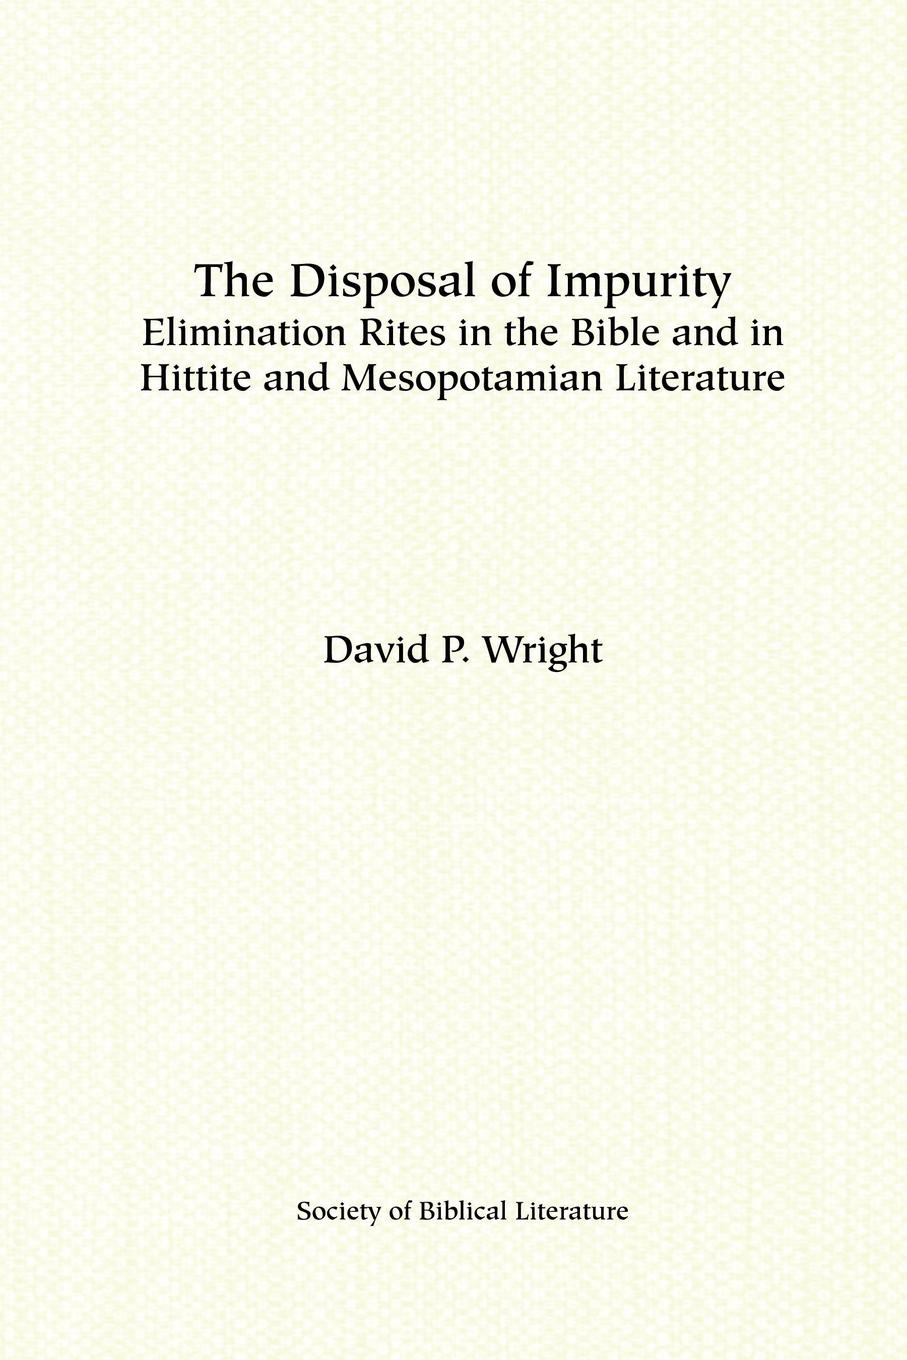 The Disposal of Impurity. Elimination Rites in the Bible and in Hittite and Mesopotamian Literature